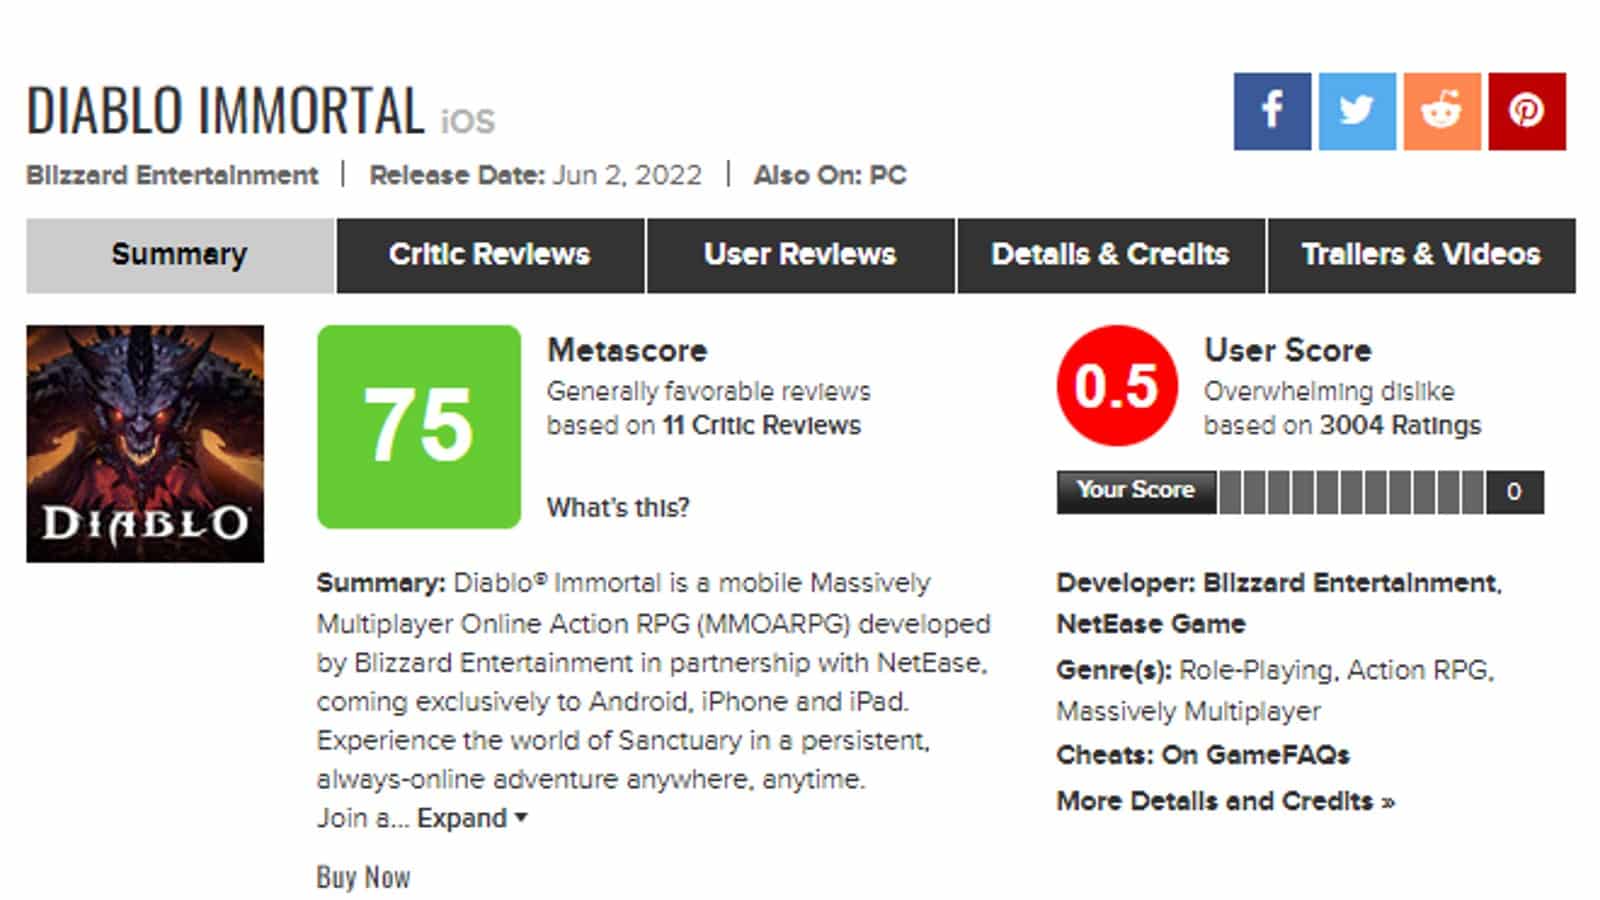 Why BFA user rating on metacritic is 3.1 but TBC and WOTLK rating is 8.0  and 7.7?